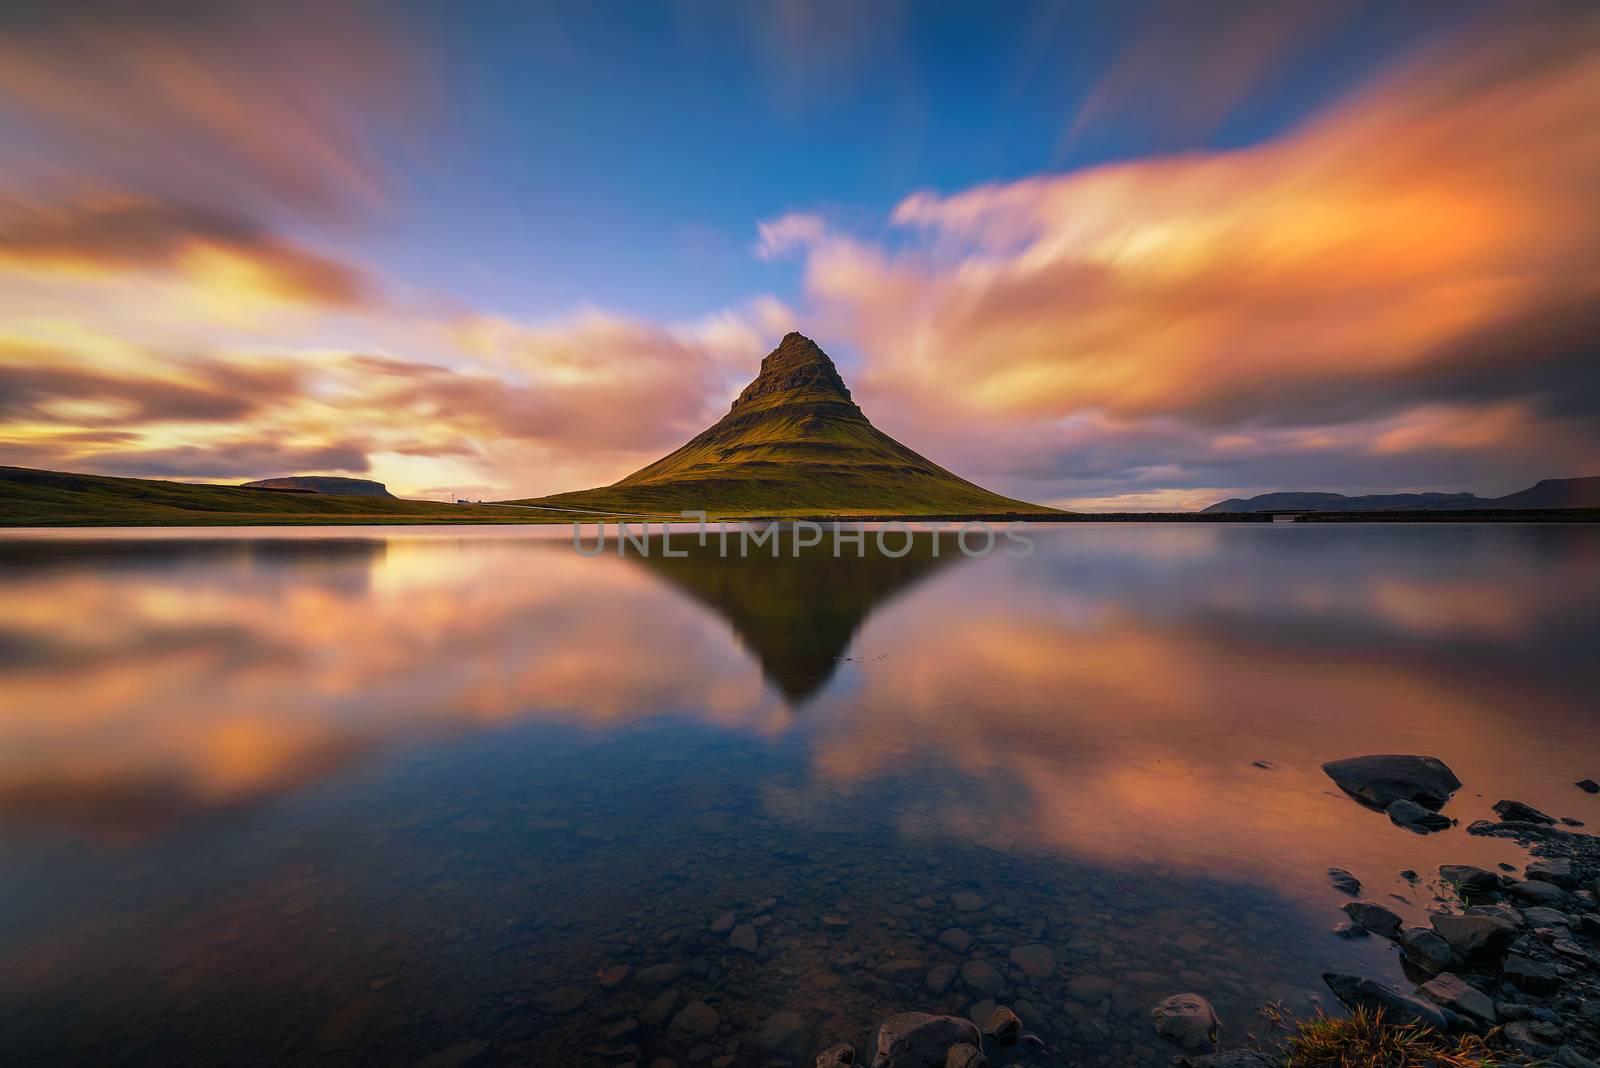 Sunset over Kirkjufell mountain with reflection in a nearby lake in Iceland by nickfox